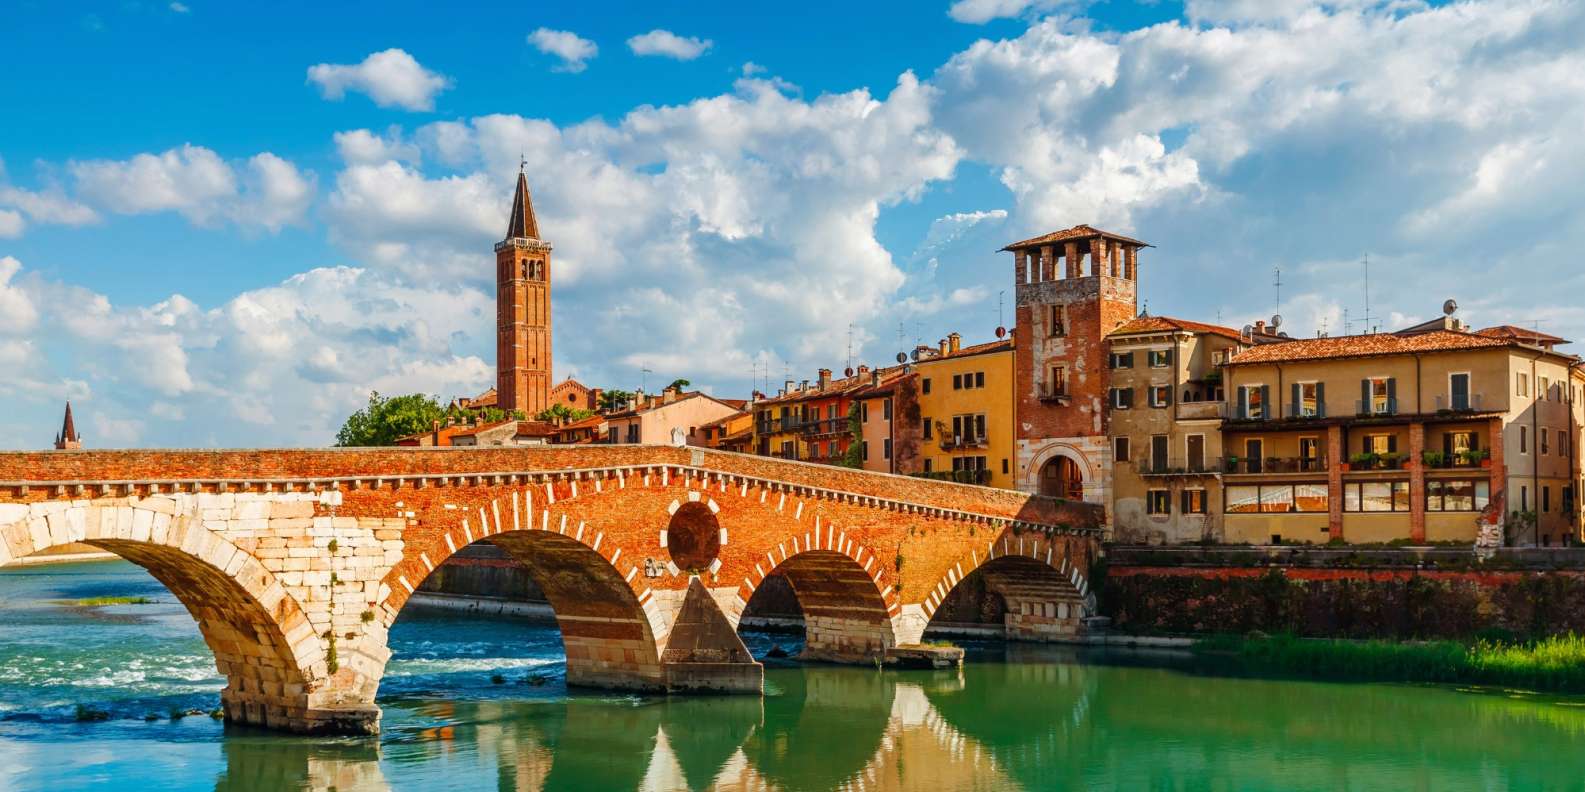 Verona - What you need to know before you go – Go Guides